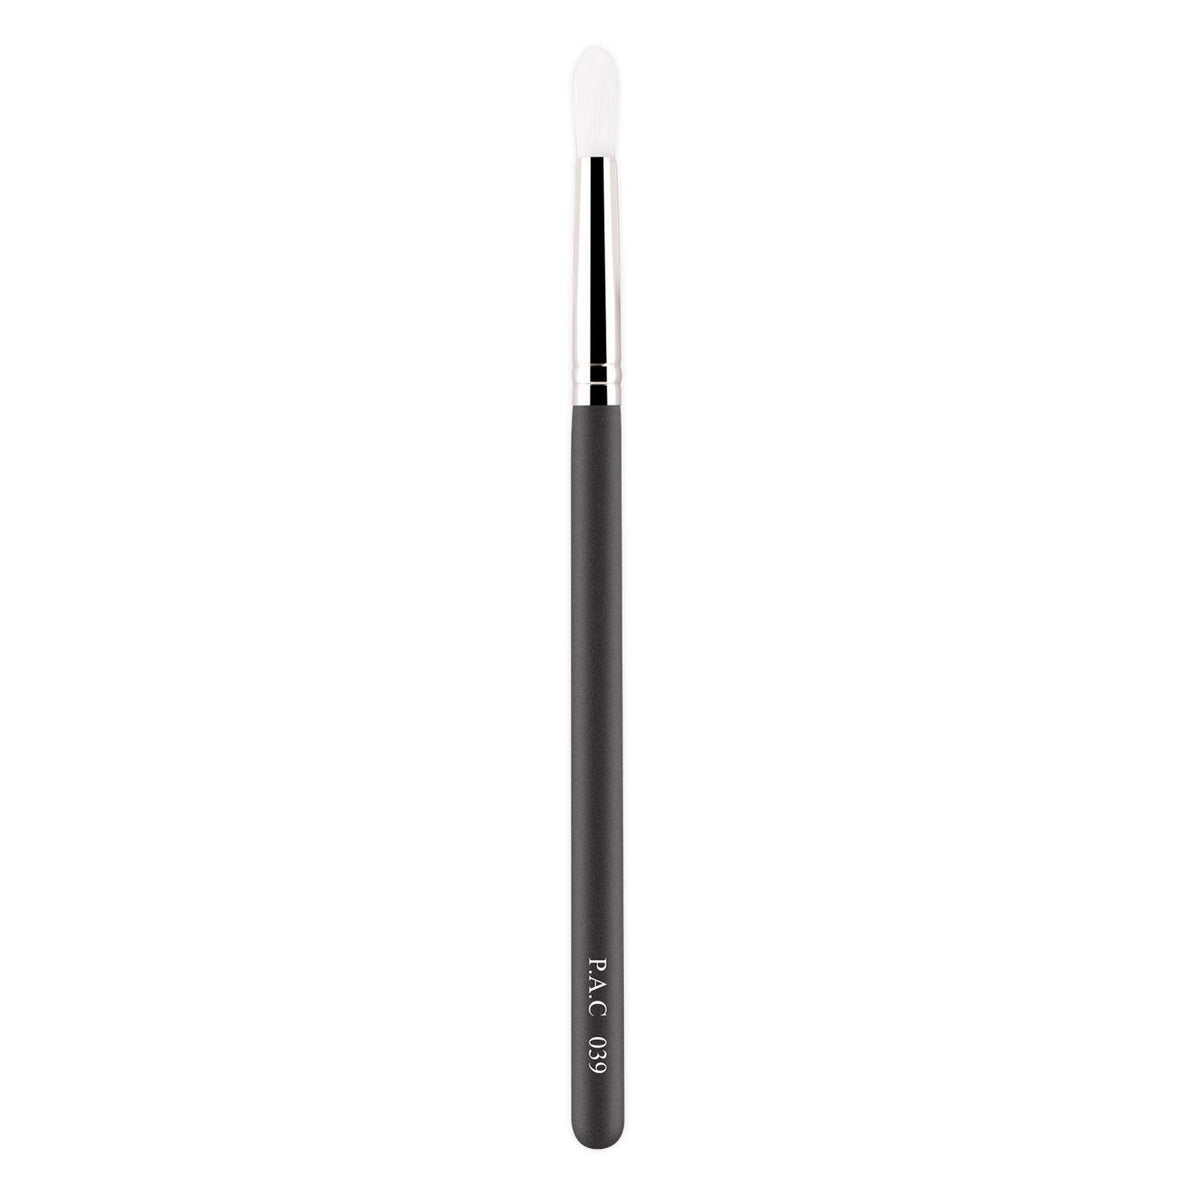 PAC Concealer Brush 039 PAC